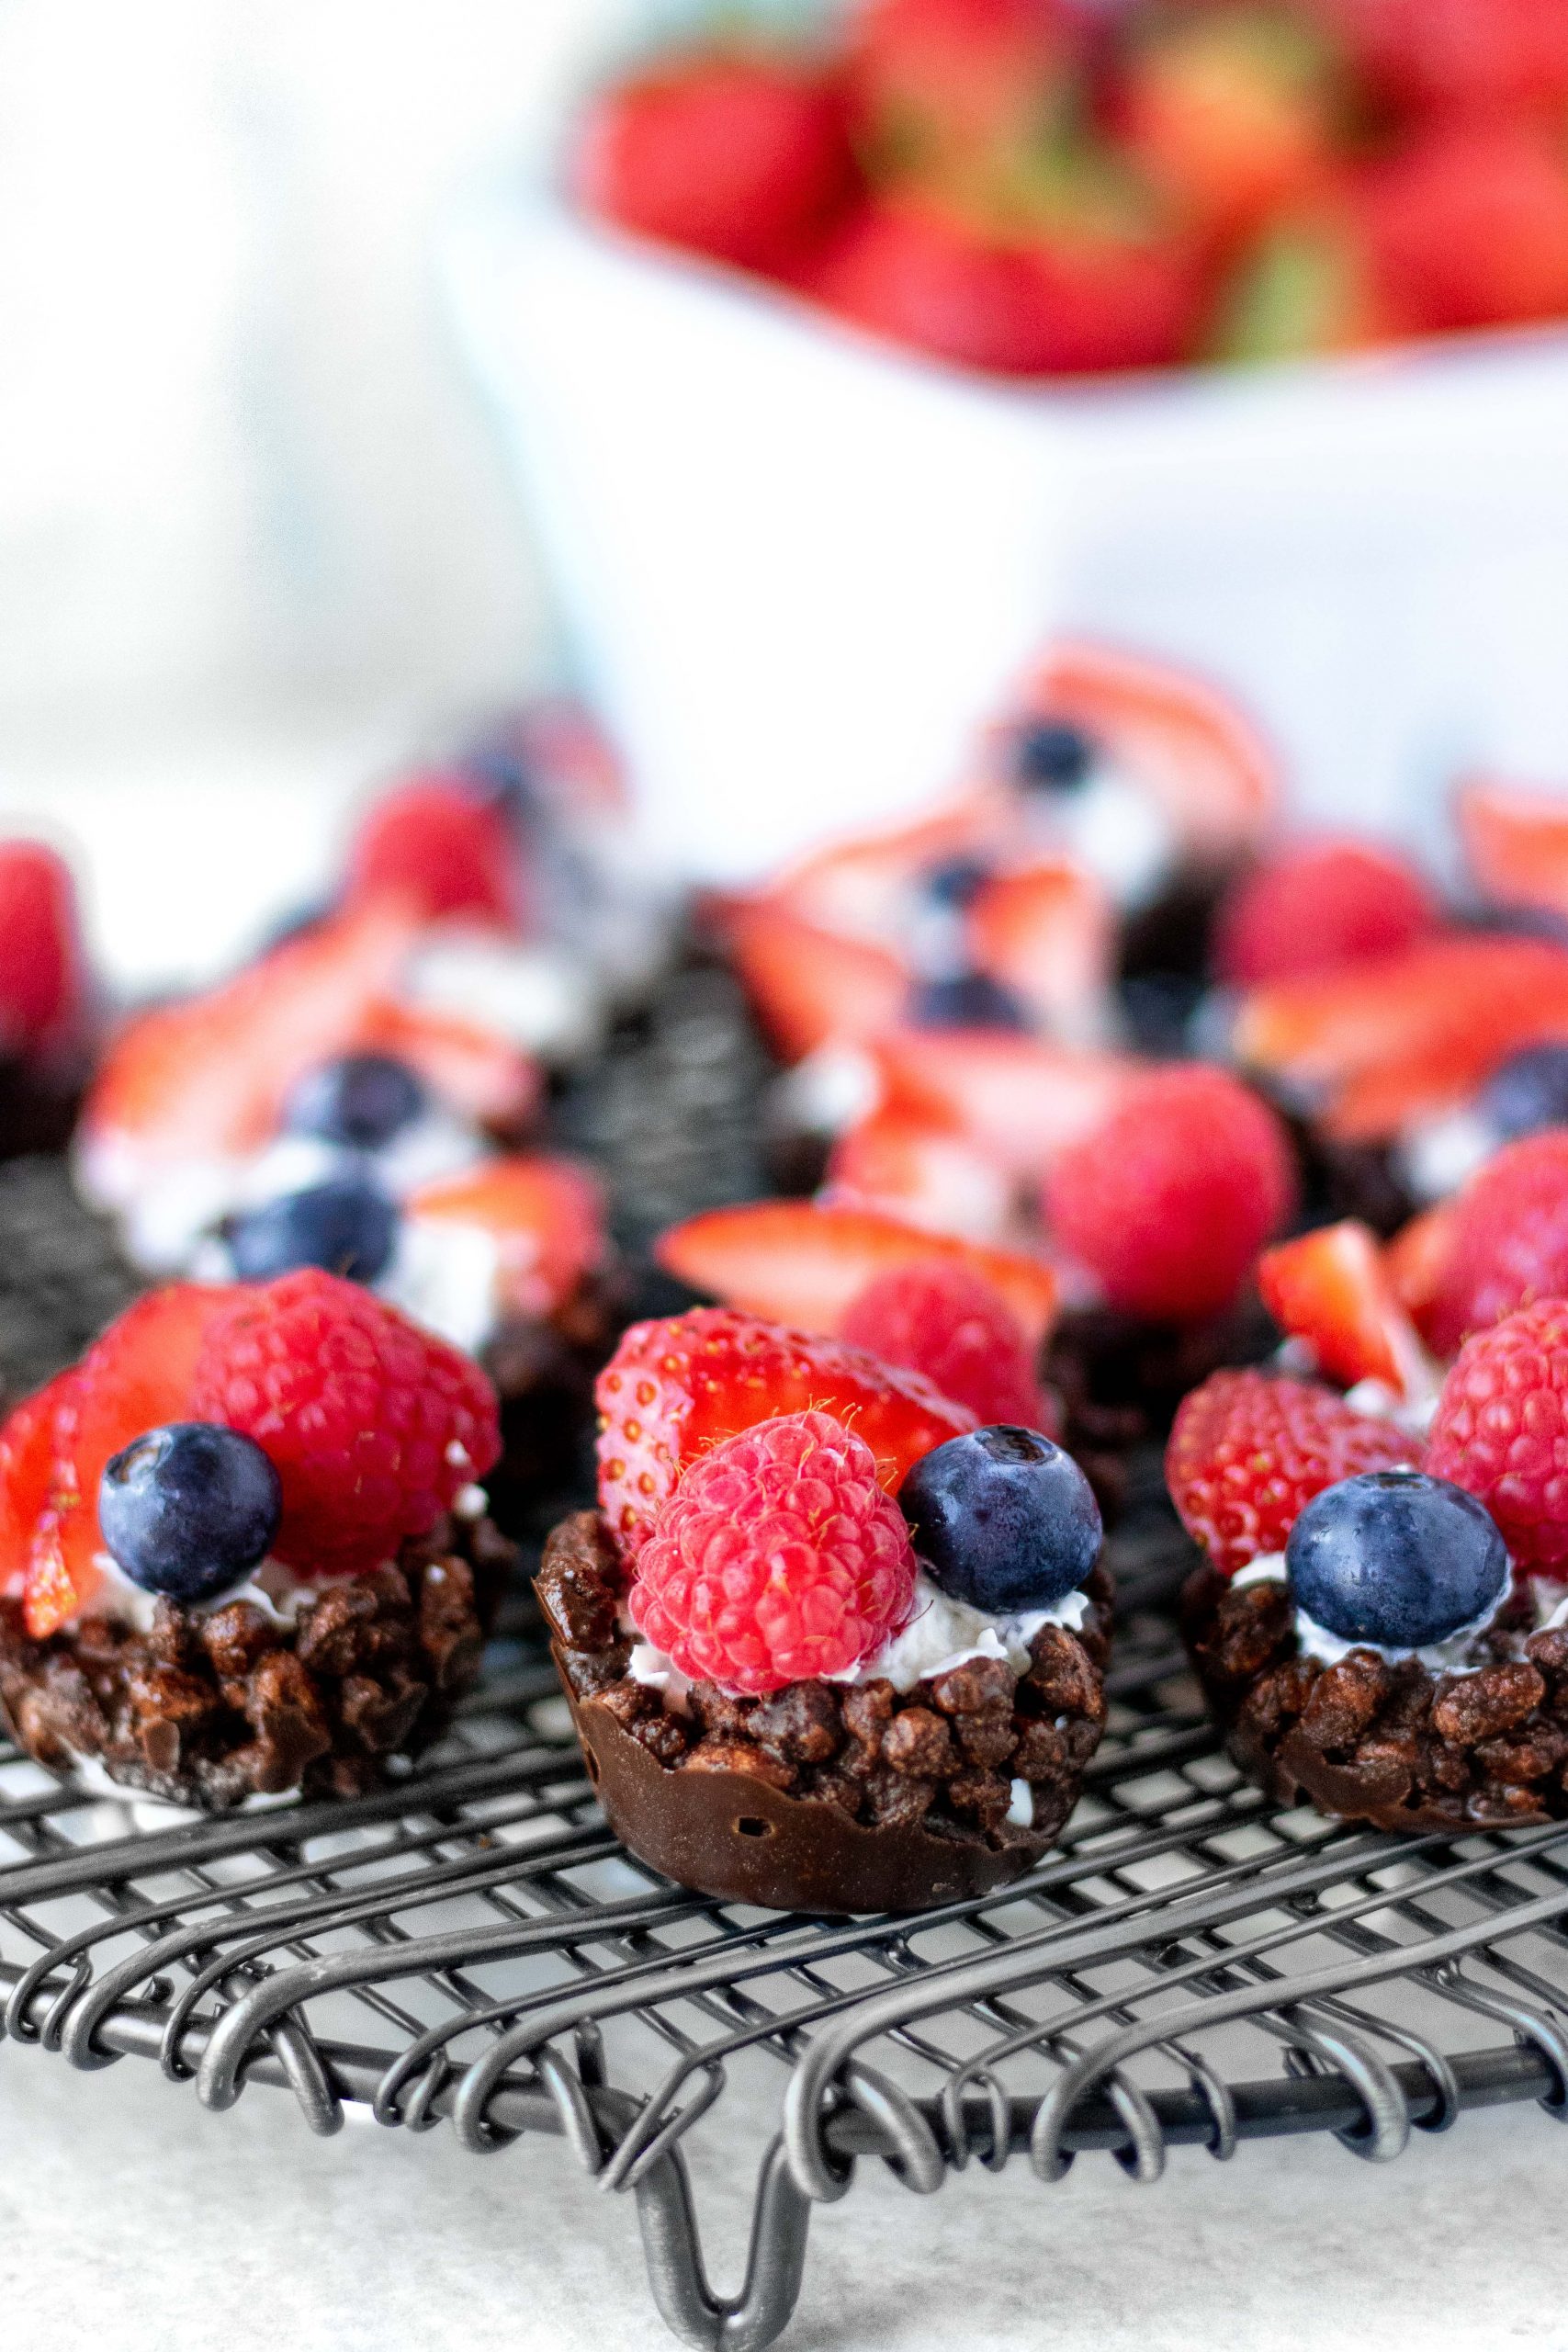 Featured Image - Dark Chocolate Crispy Berry Bites from A Thousand Crumbs